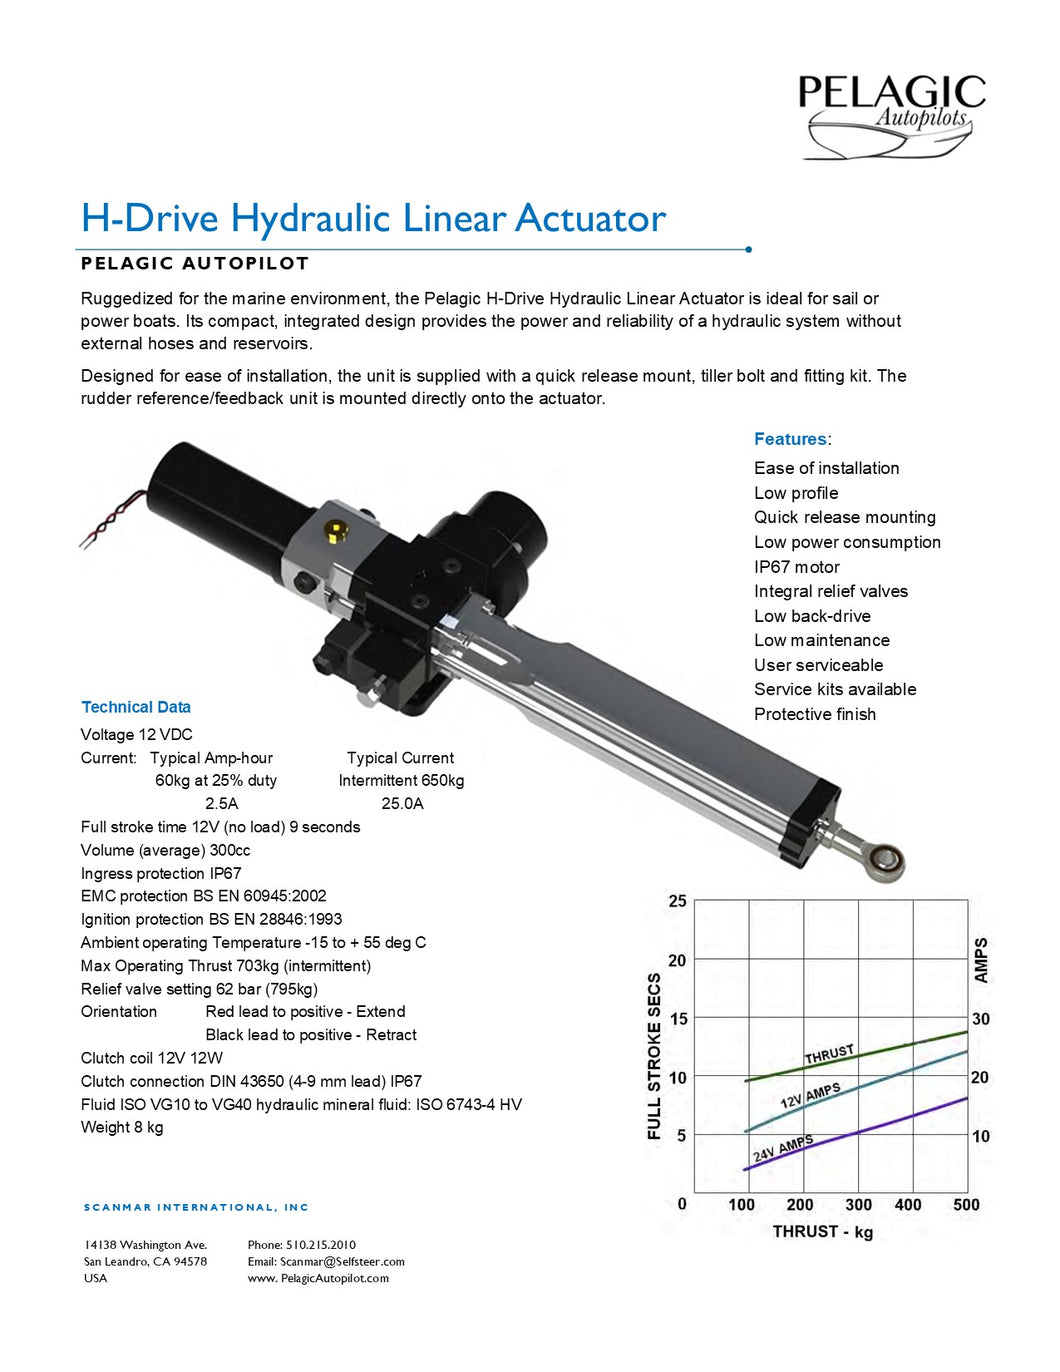 Hydraulic Linear Actuator - Heavy - In stock, ships in 3 - 5 business days